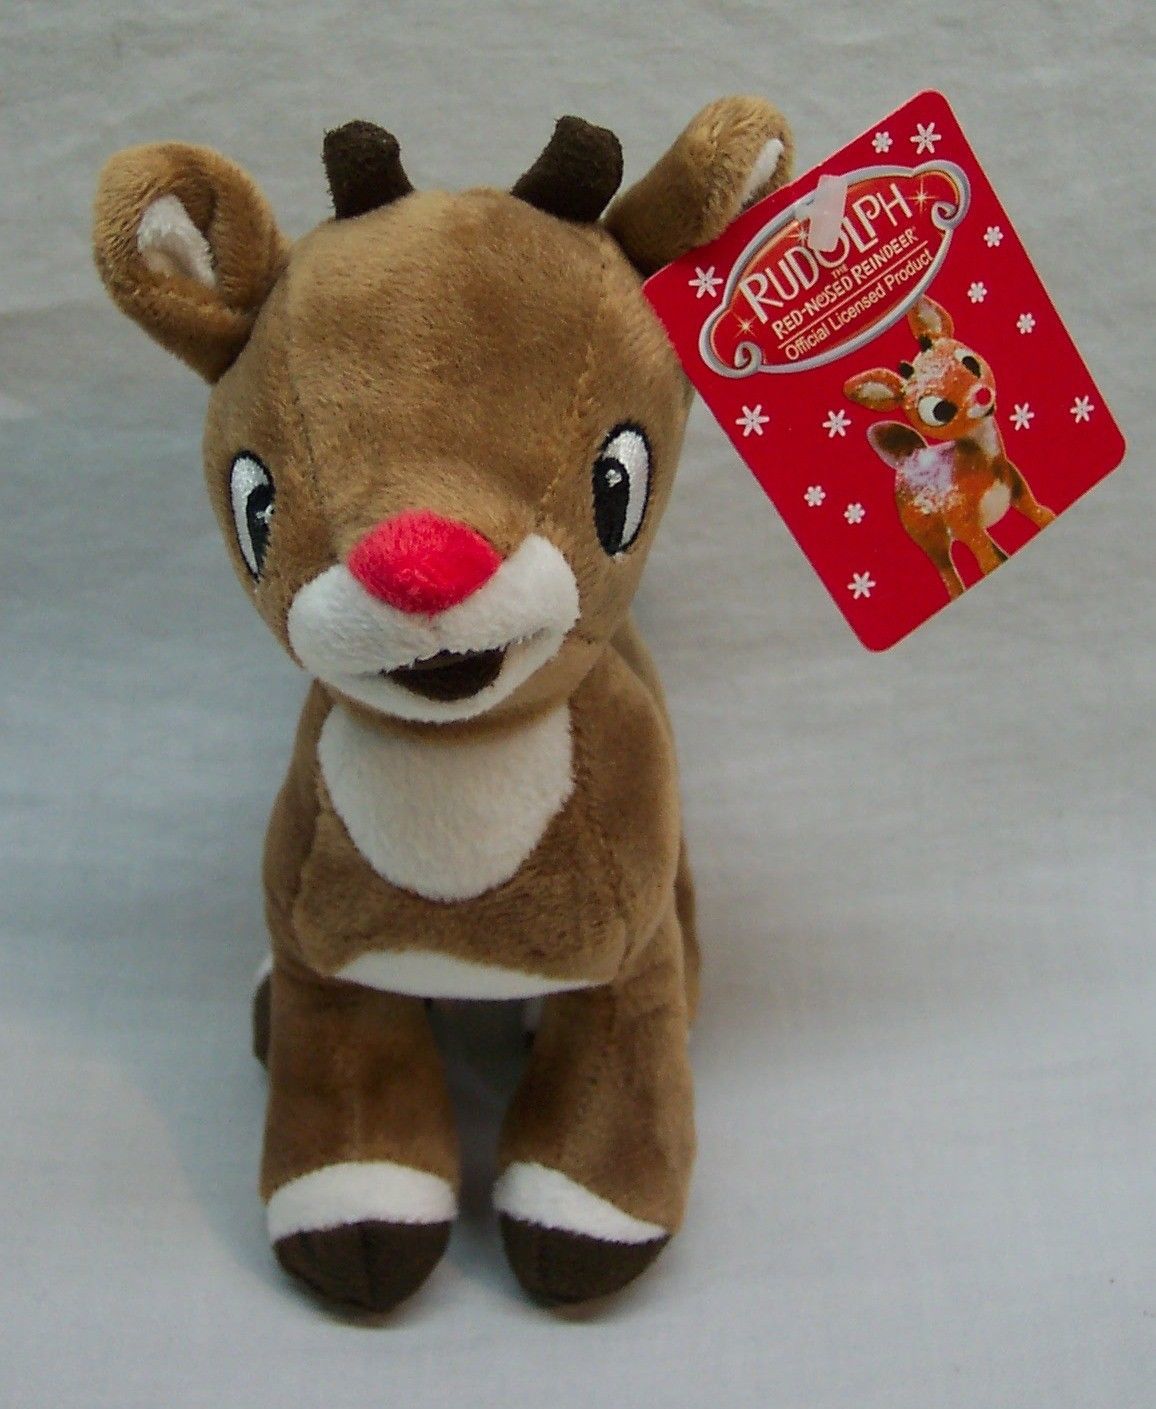 RUDOLPH THE RED-NOSED REINDEER 6